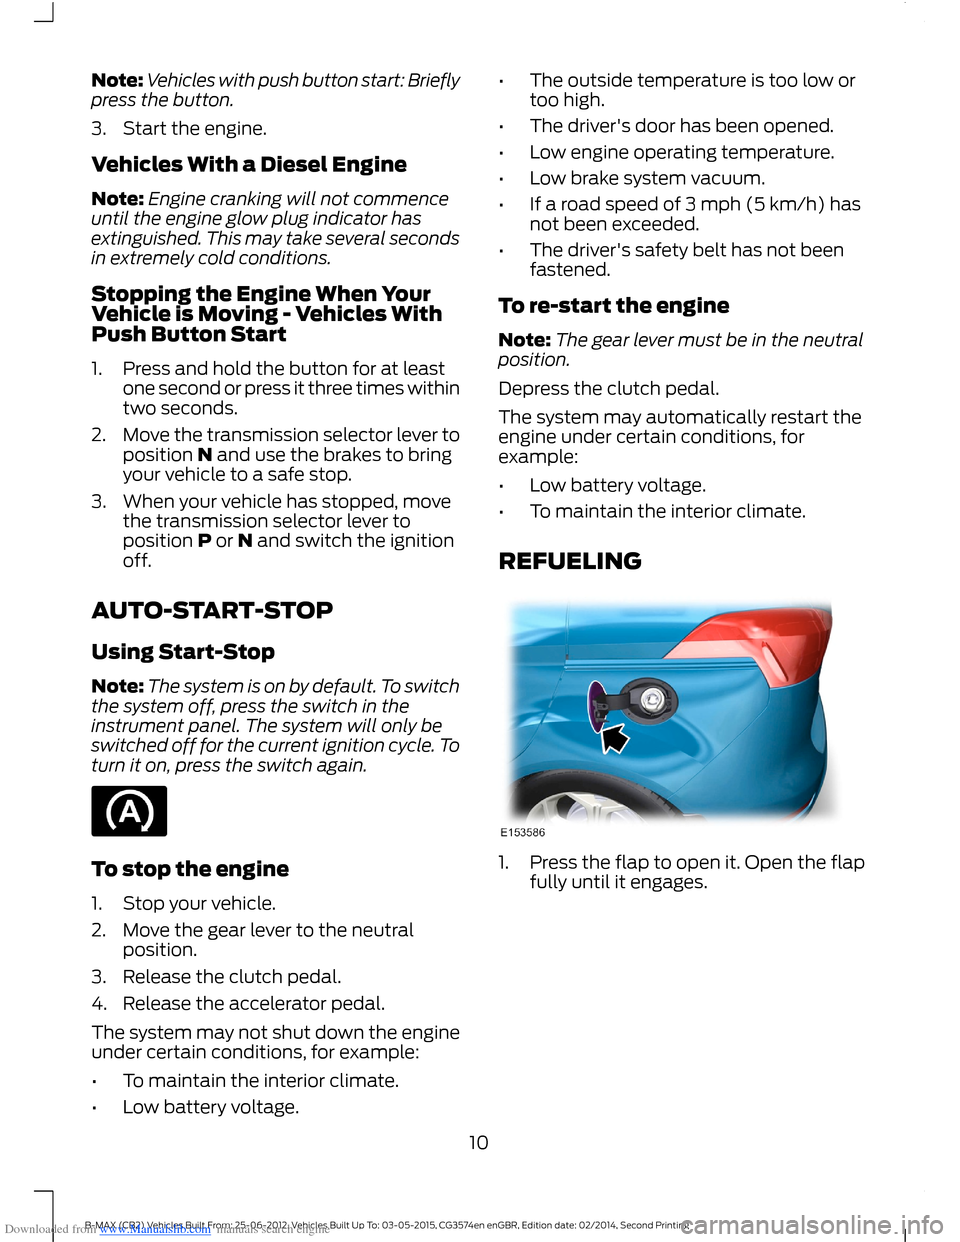 FORD B MAX 2014 1.G Quick Reference Guide Downloaded from www.Manualslib.com manuals search engine Note:Vehicles with push button start: Brieflypress the button.
3.Start the engine.
Vehicles With a Diesel Engine
Note:Engine cranking will not 